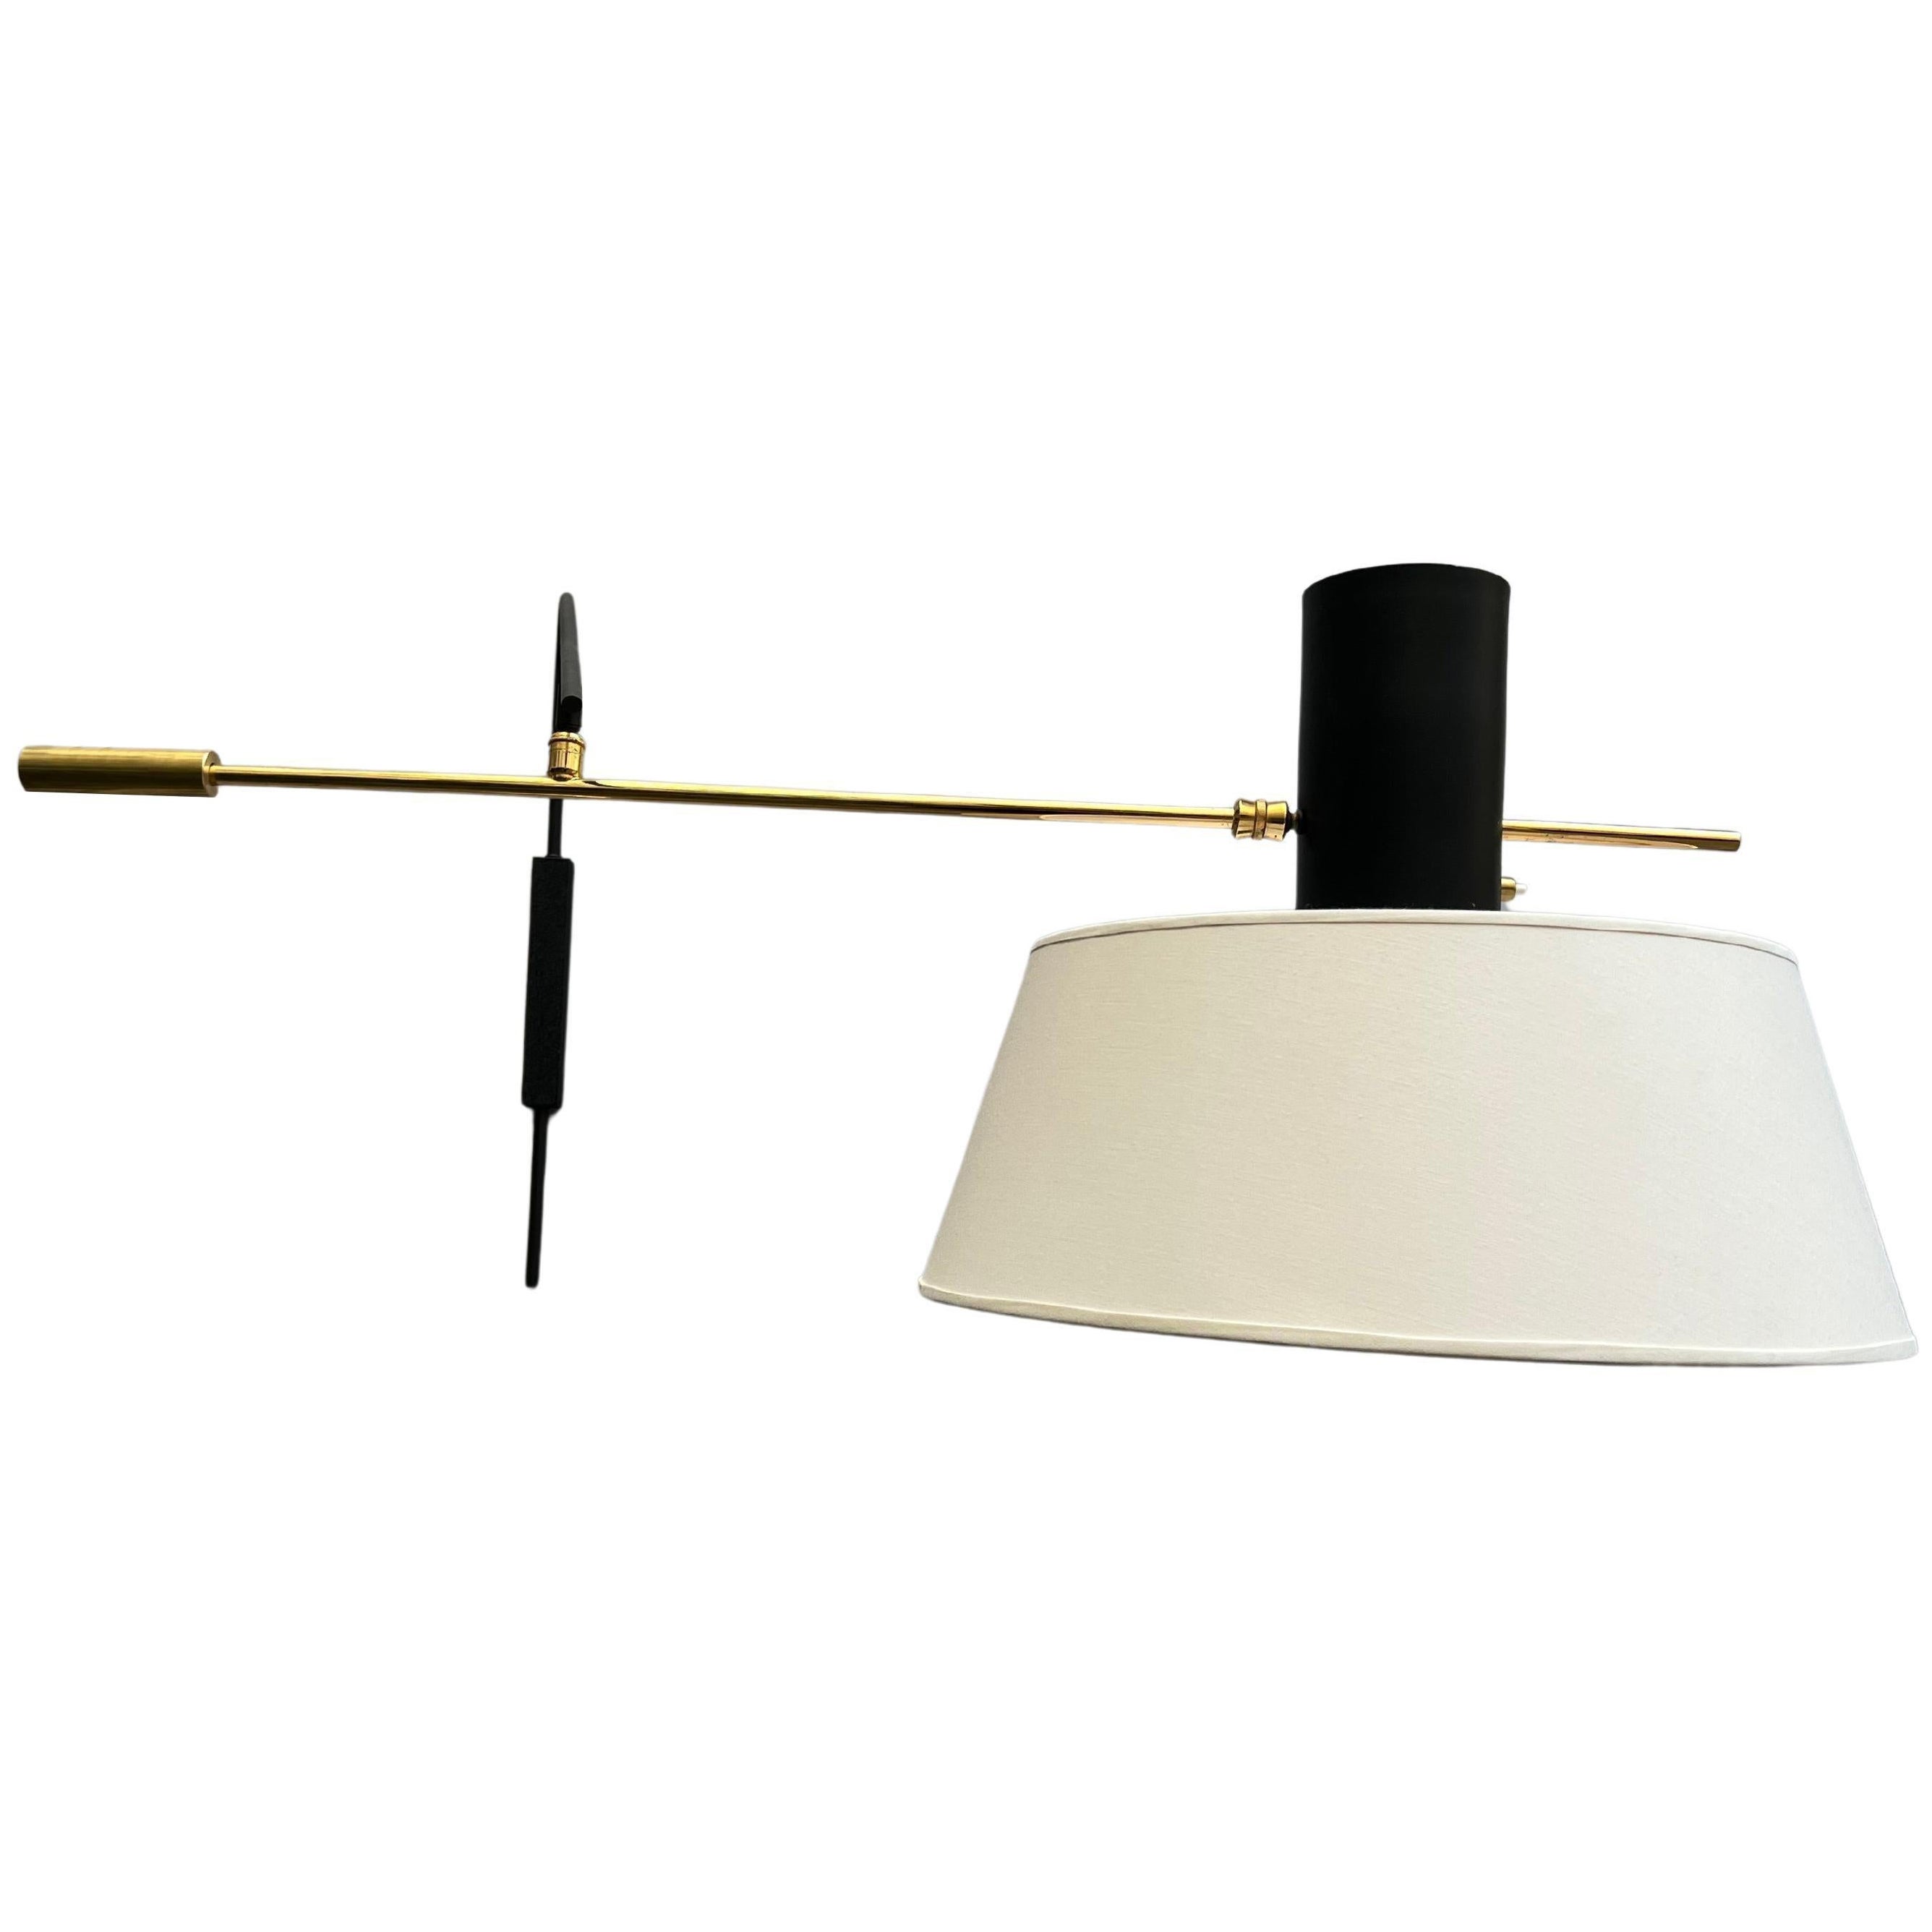 Large pendulum wall lamp with inverted shade Maison Lunel, France, circa 1960